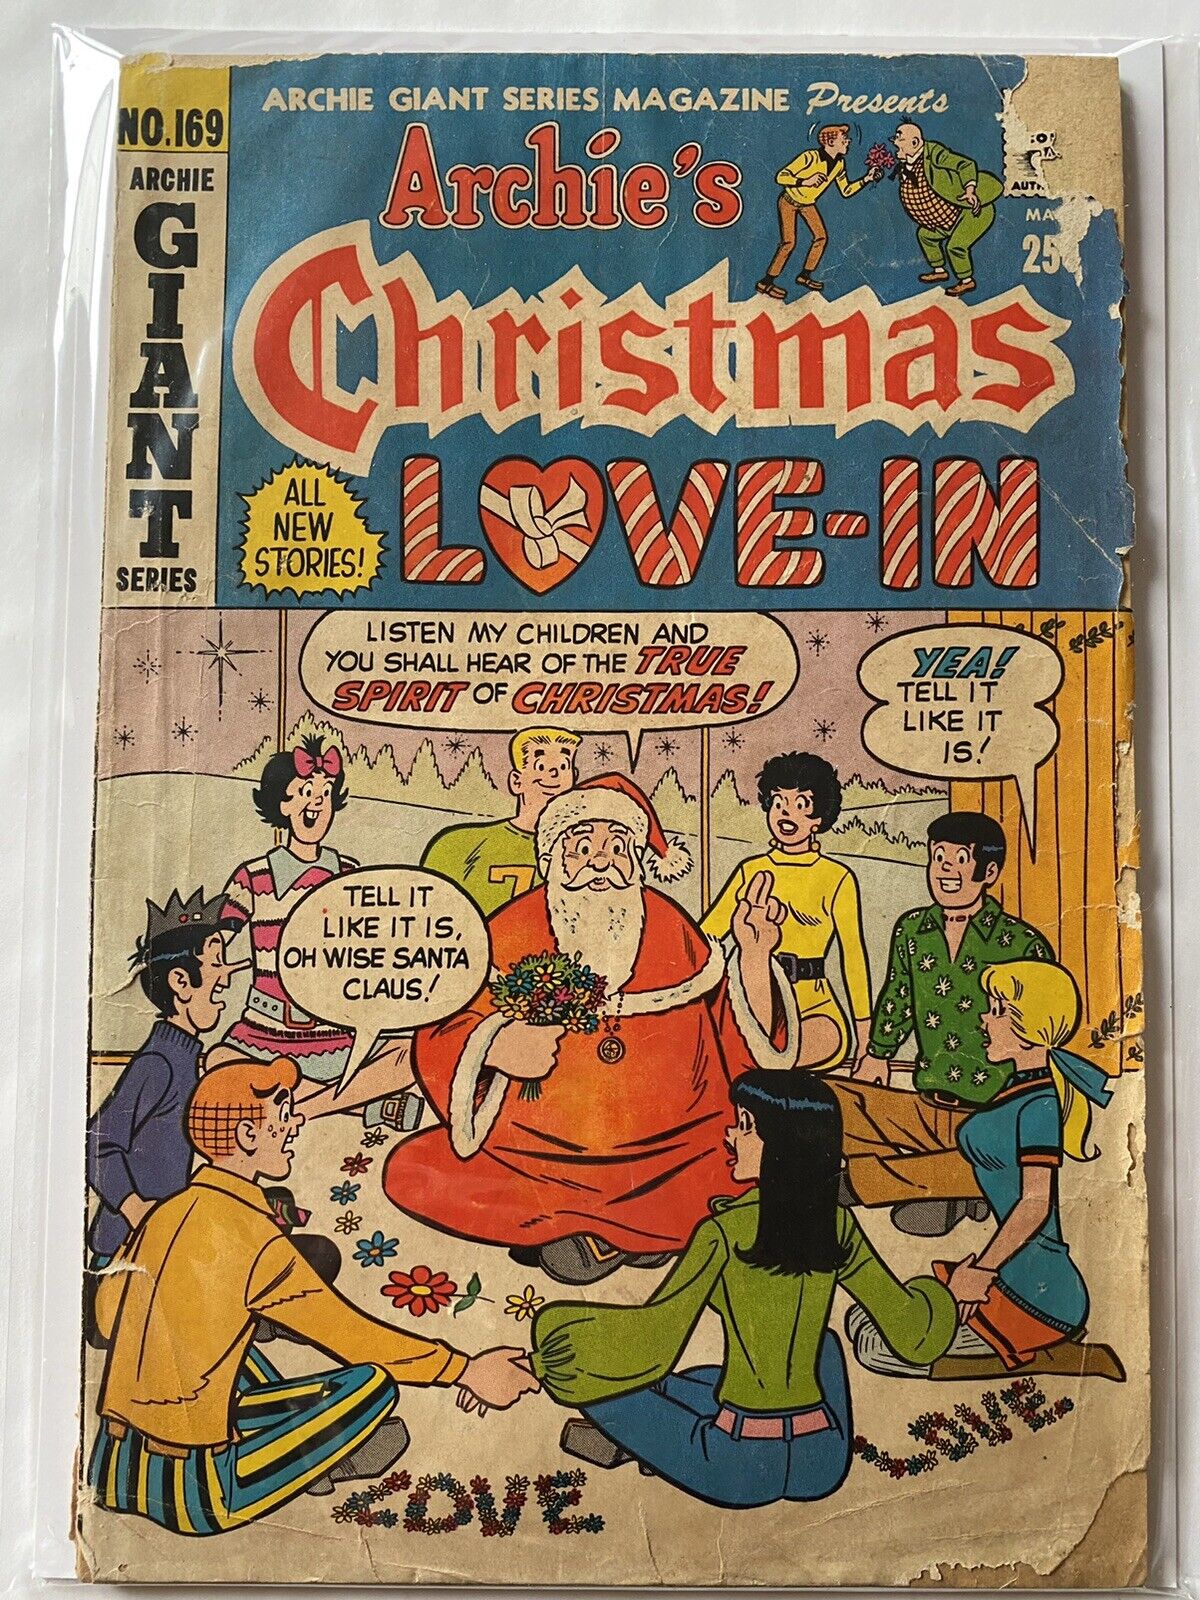 Archie Giant Series 169 Archie Comics 1970 PR / FR  1.0 - 1.5  Christmas Love-In